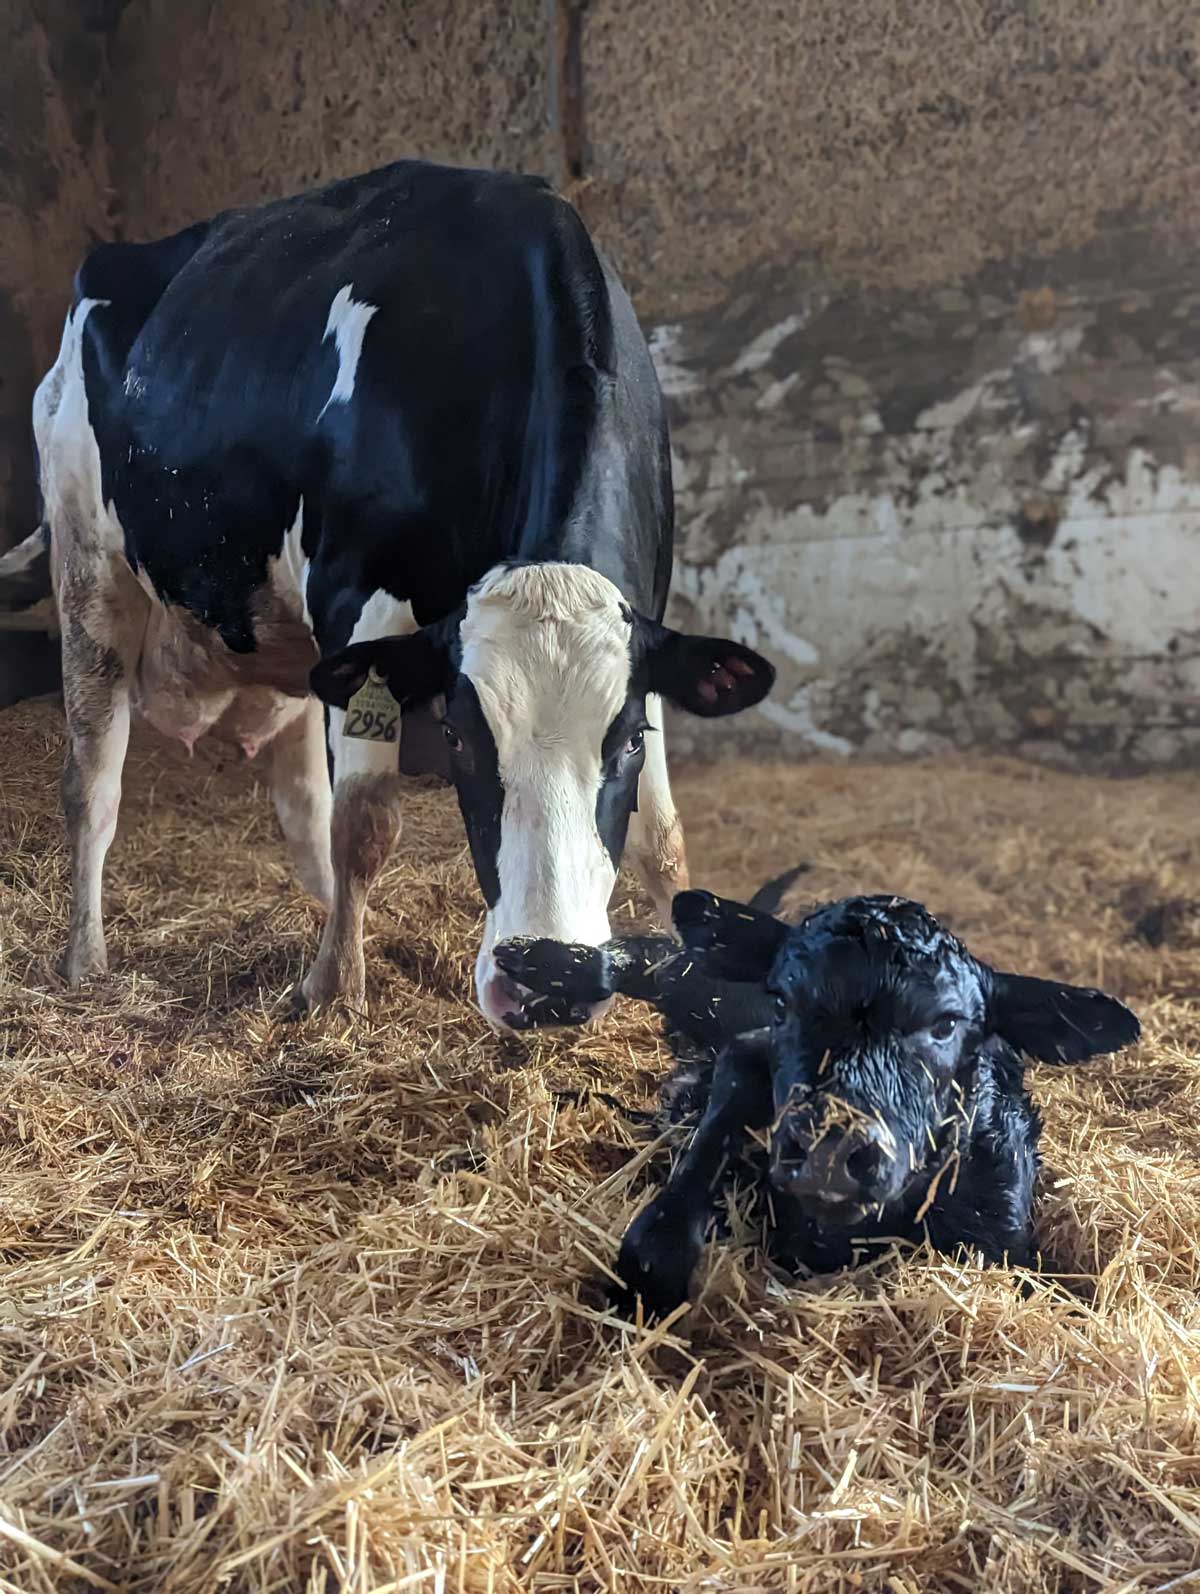 A newborn angus calf lays in deep straw in an indoor pen. The calf's dam, a Holstein, stands behind the calf with her head down.